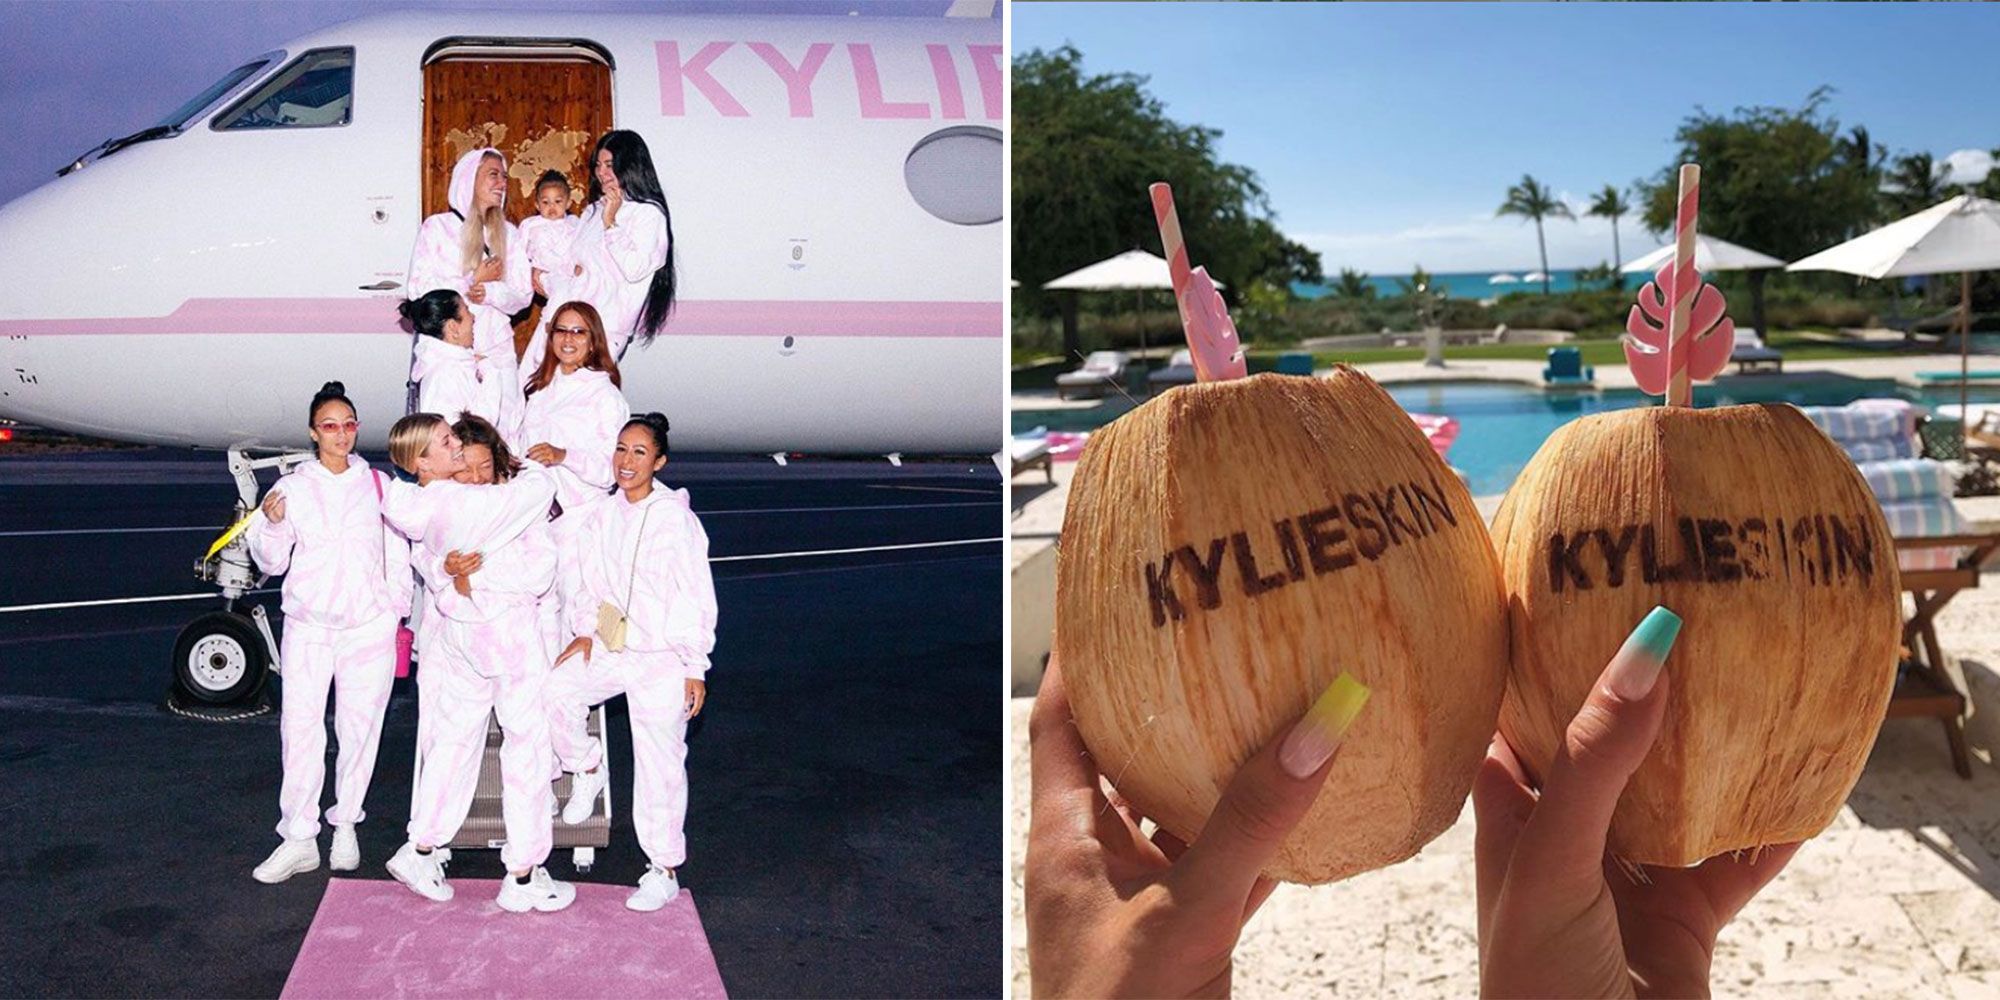 Kylie Jenner Boards A Private Plane For Weekend Getaway: Photo